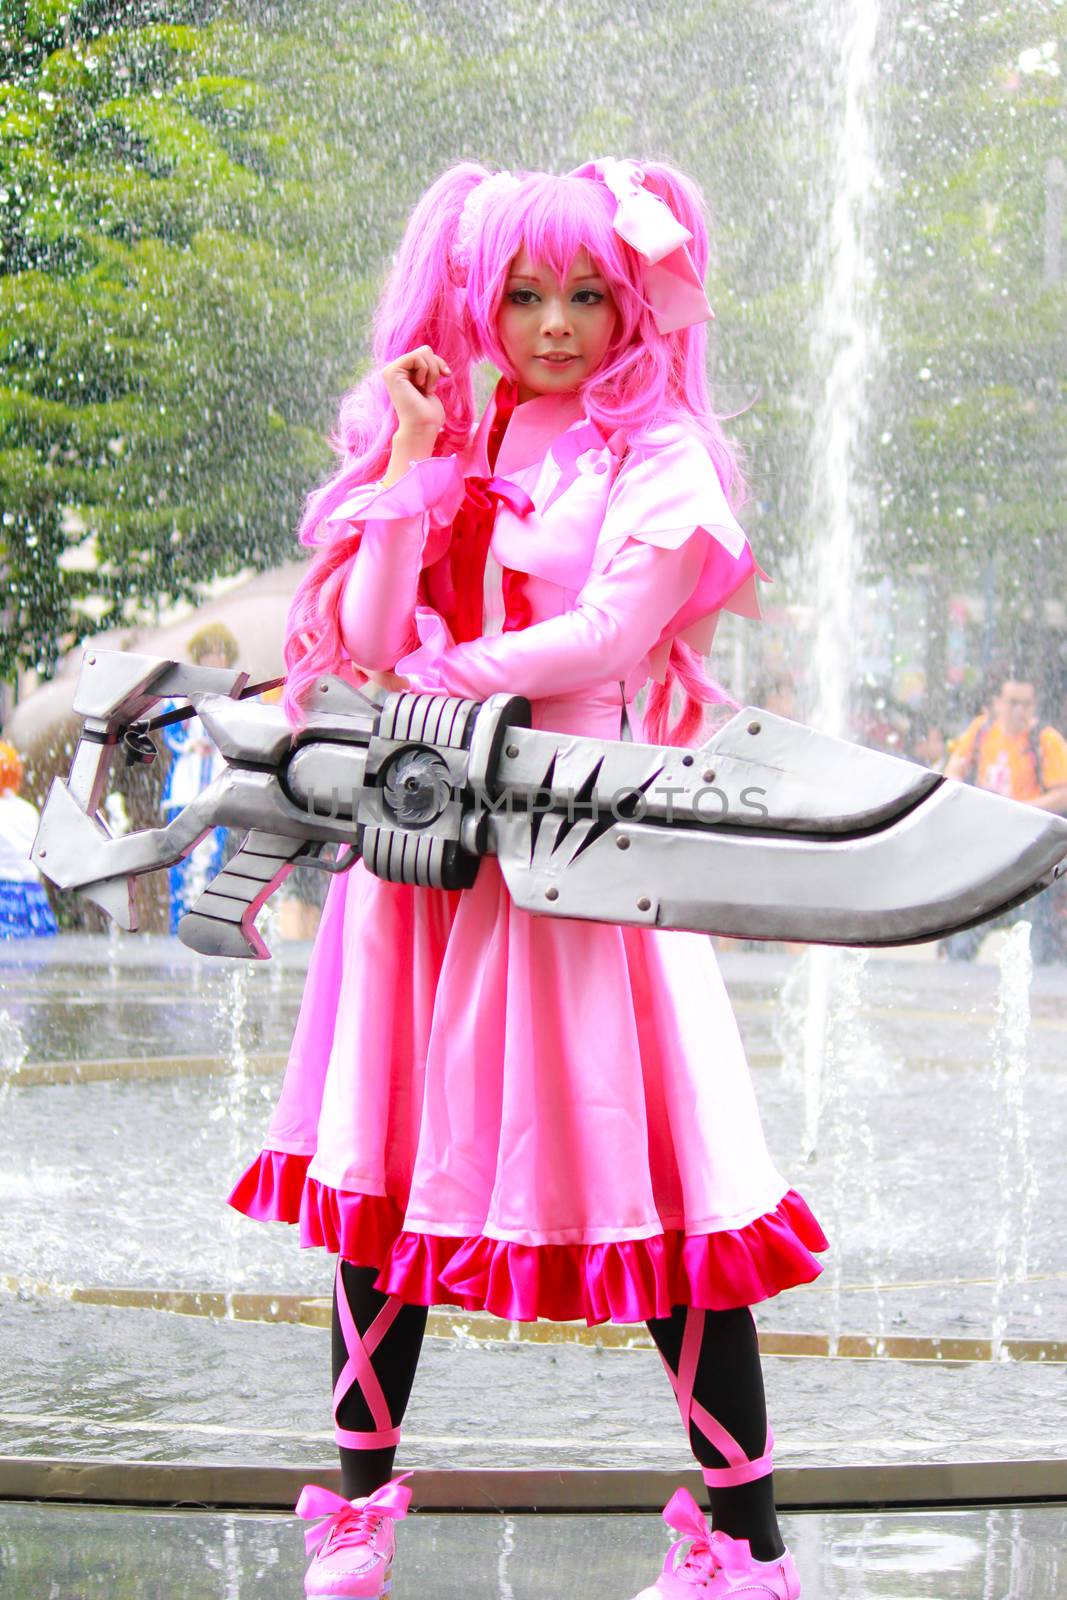 Bangkok - Aug 31: An unidentified Japanese anime cosplay Mine pose  on August 31, 2014 at Central World, Bangkok, Thailand.